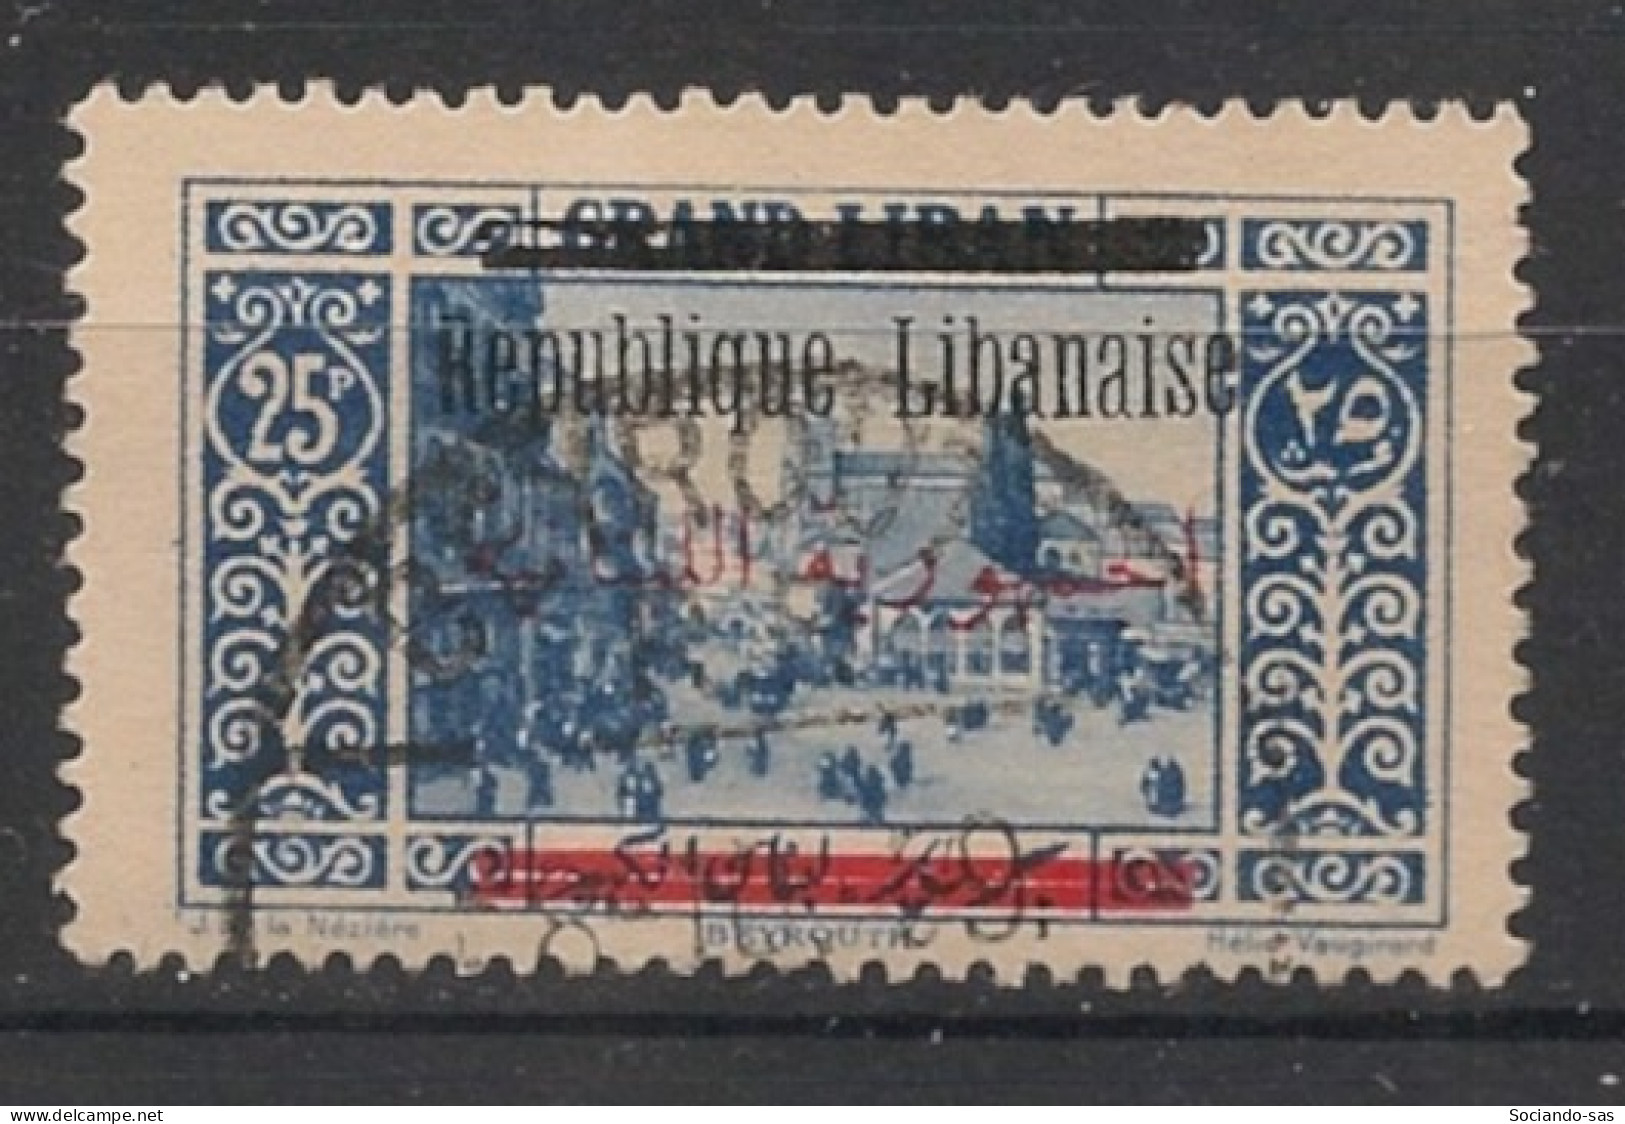 GRAND LIBAN - 1928 - N°YT. 110 - Beyrouth 25pi Bleu - Oblitéré / Used - Used Stamps